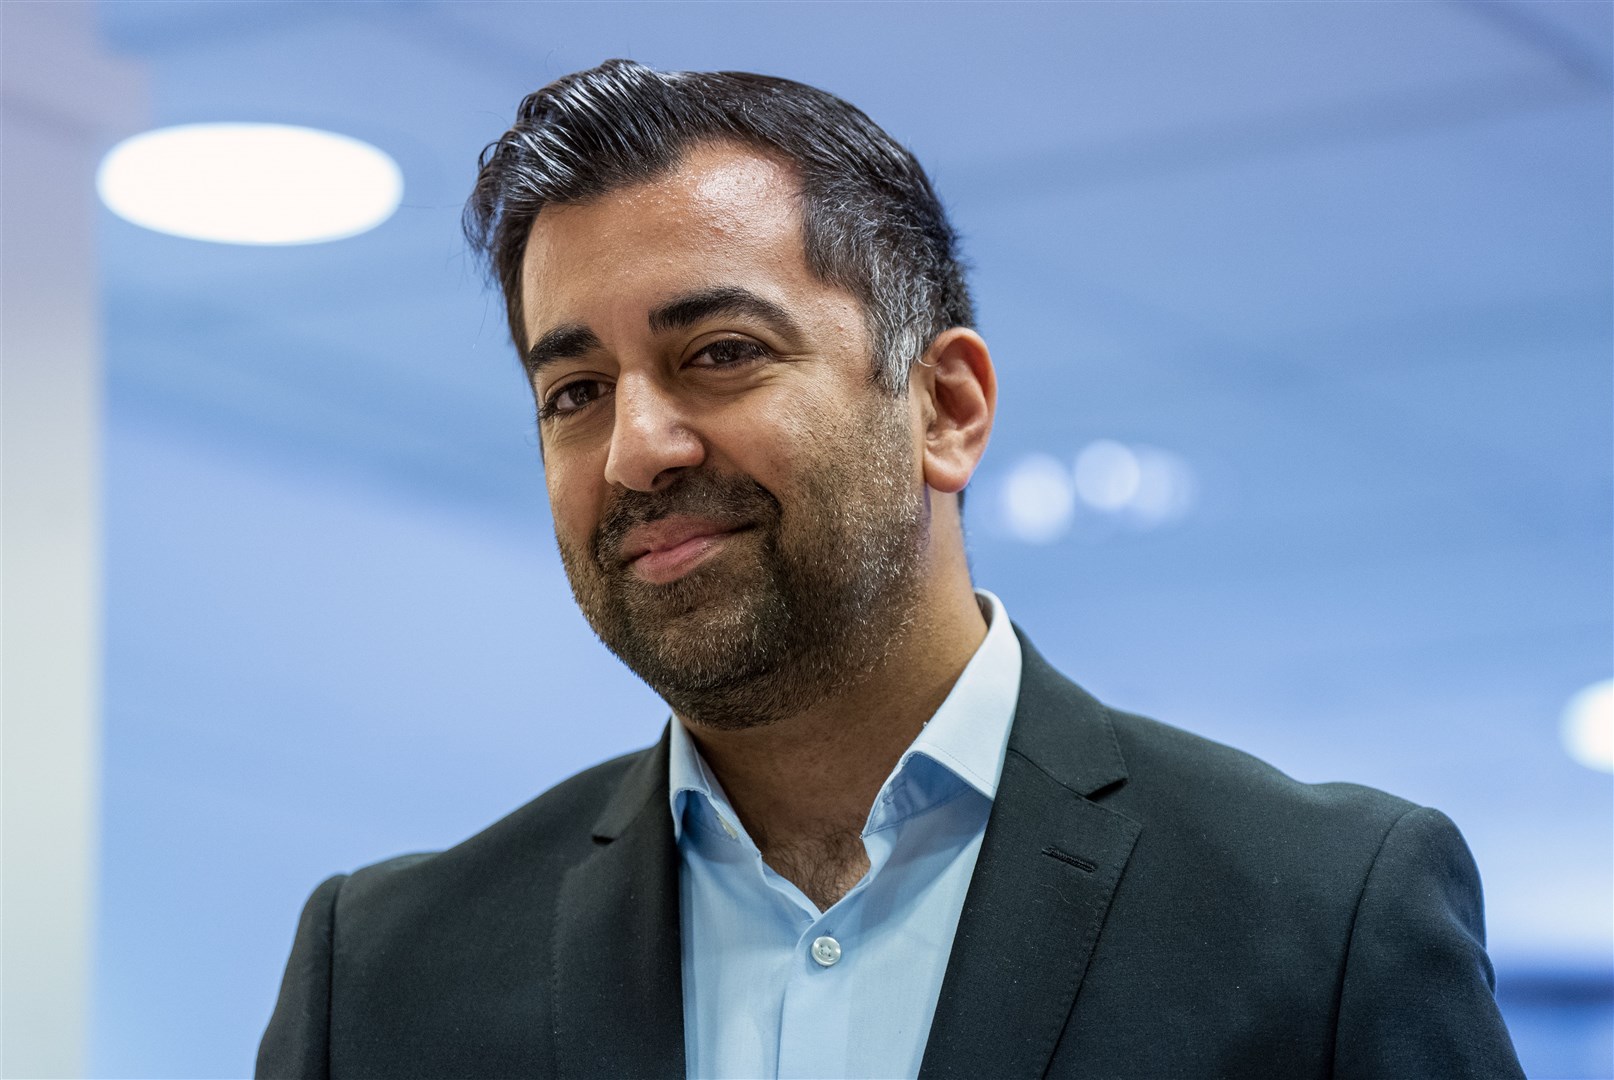 Humza Yousaf told a fringe audience he had not been approached over an electoral pact (Jane Barlow/PA)